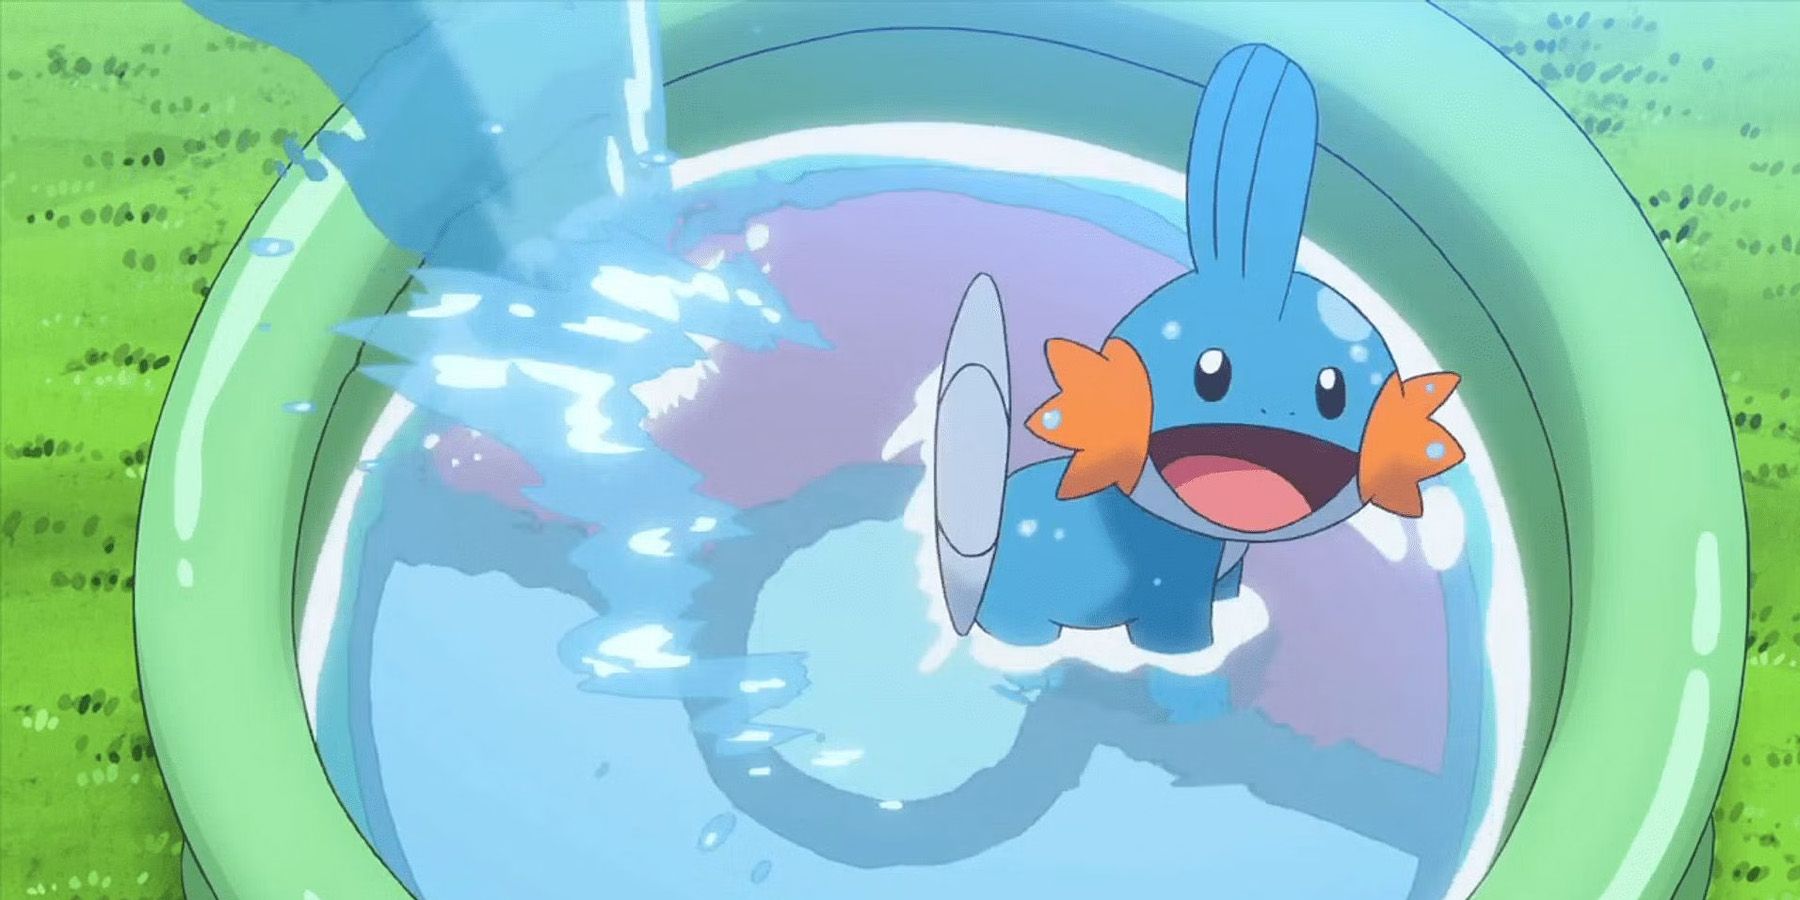 A screenshot of Mudkip playing in a Poke Ball-themed pool in the Pokemon anime.